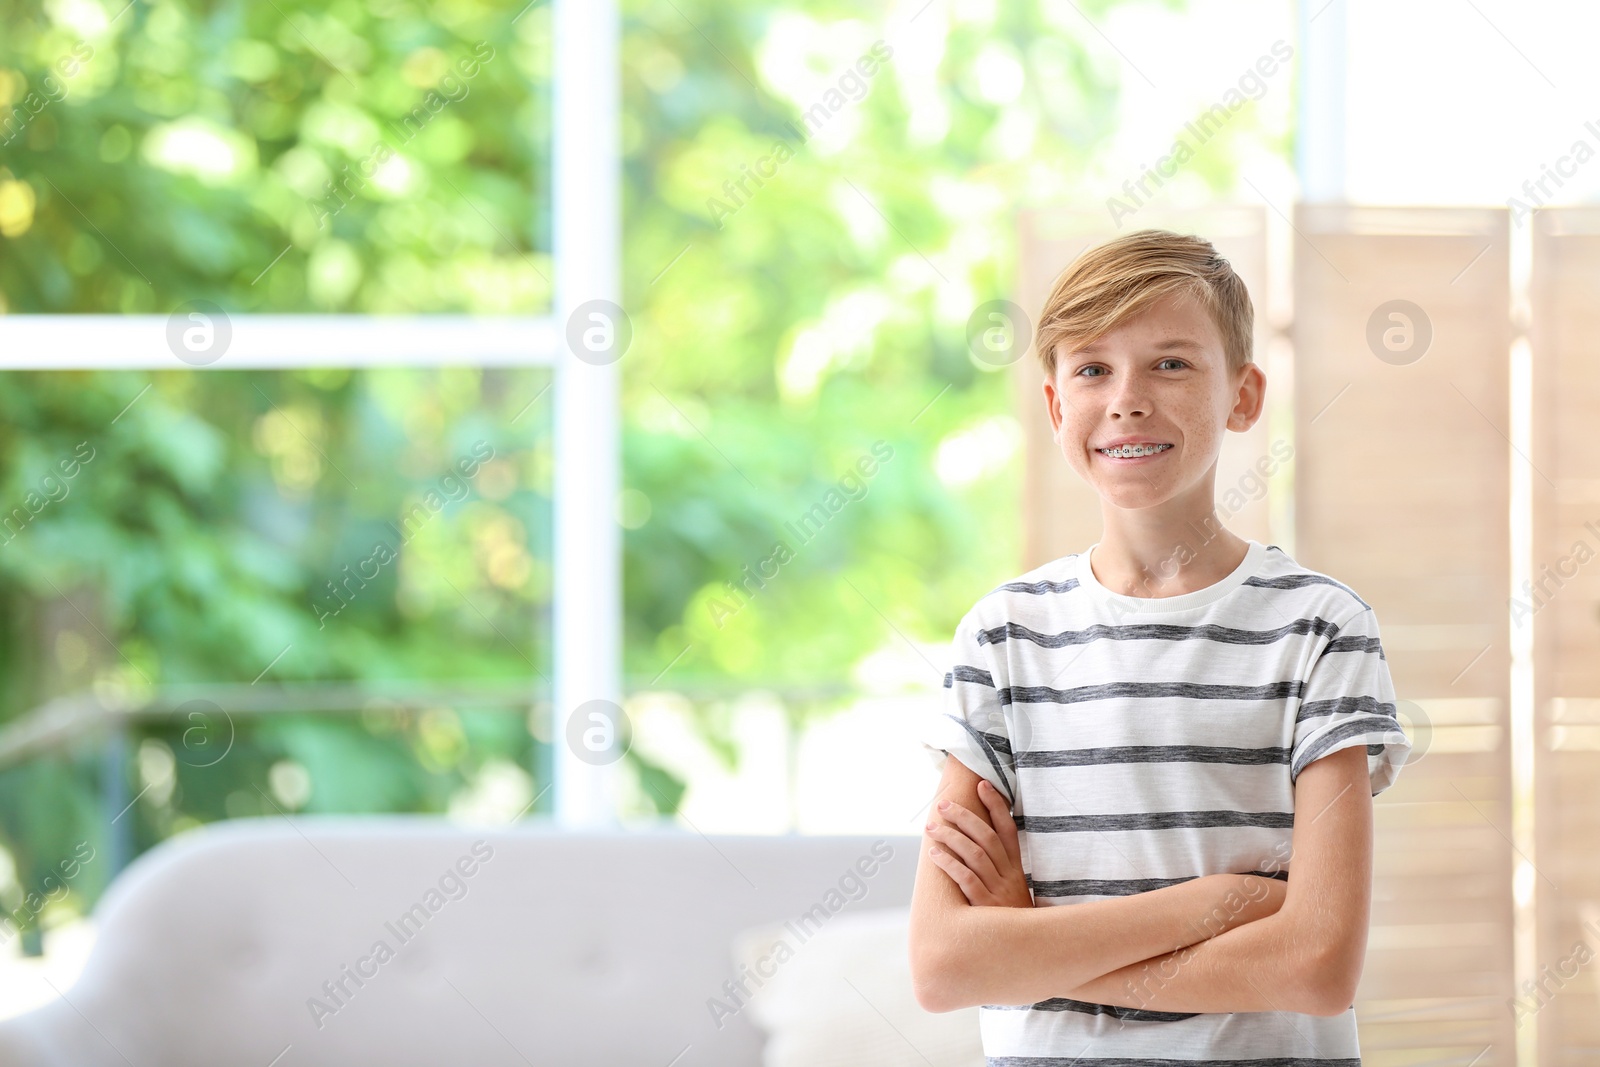 Photo of Portrait of young boy standing near window indoors